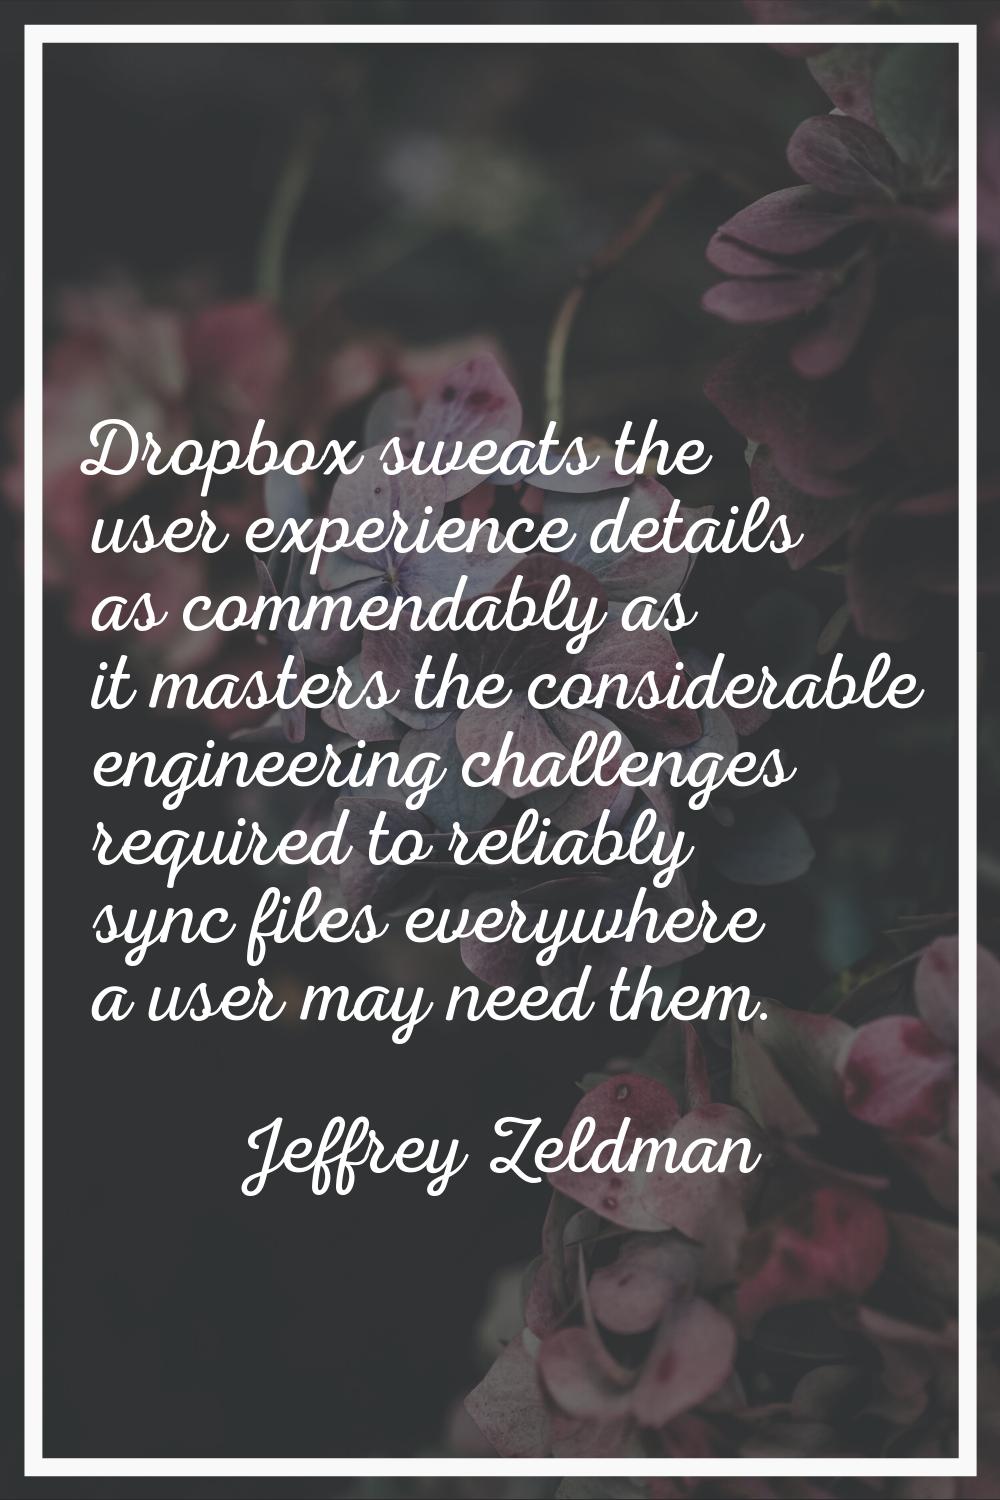 Dropbox sweats the user experience details as commendably as it masters the considerable engineerin